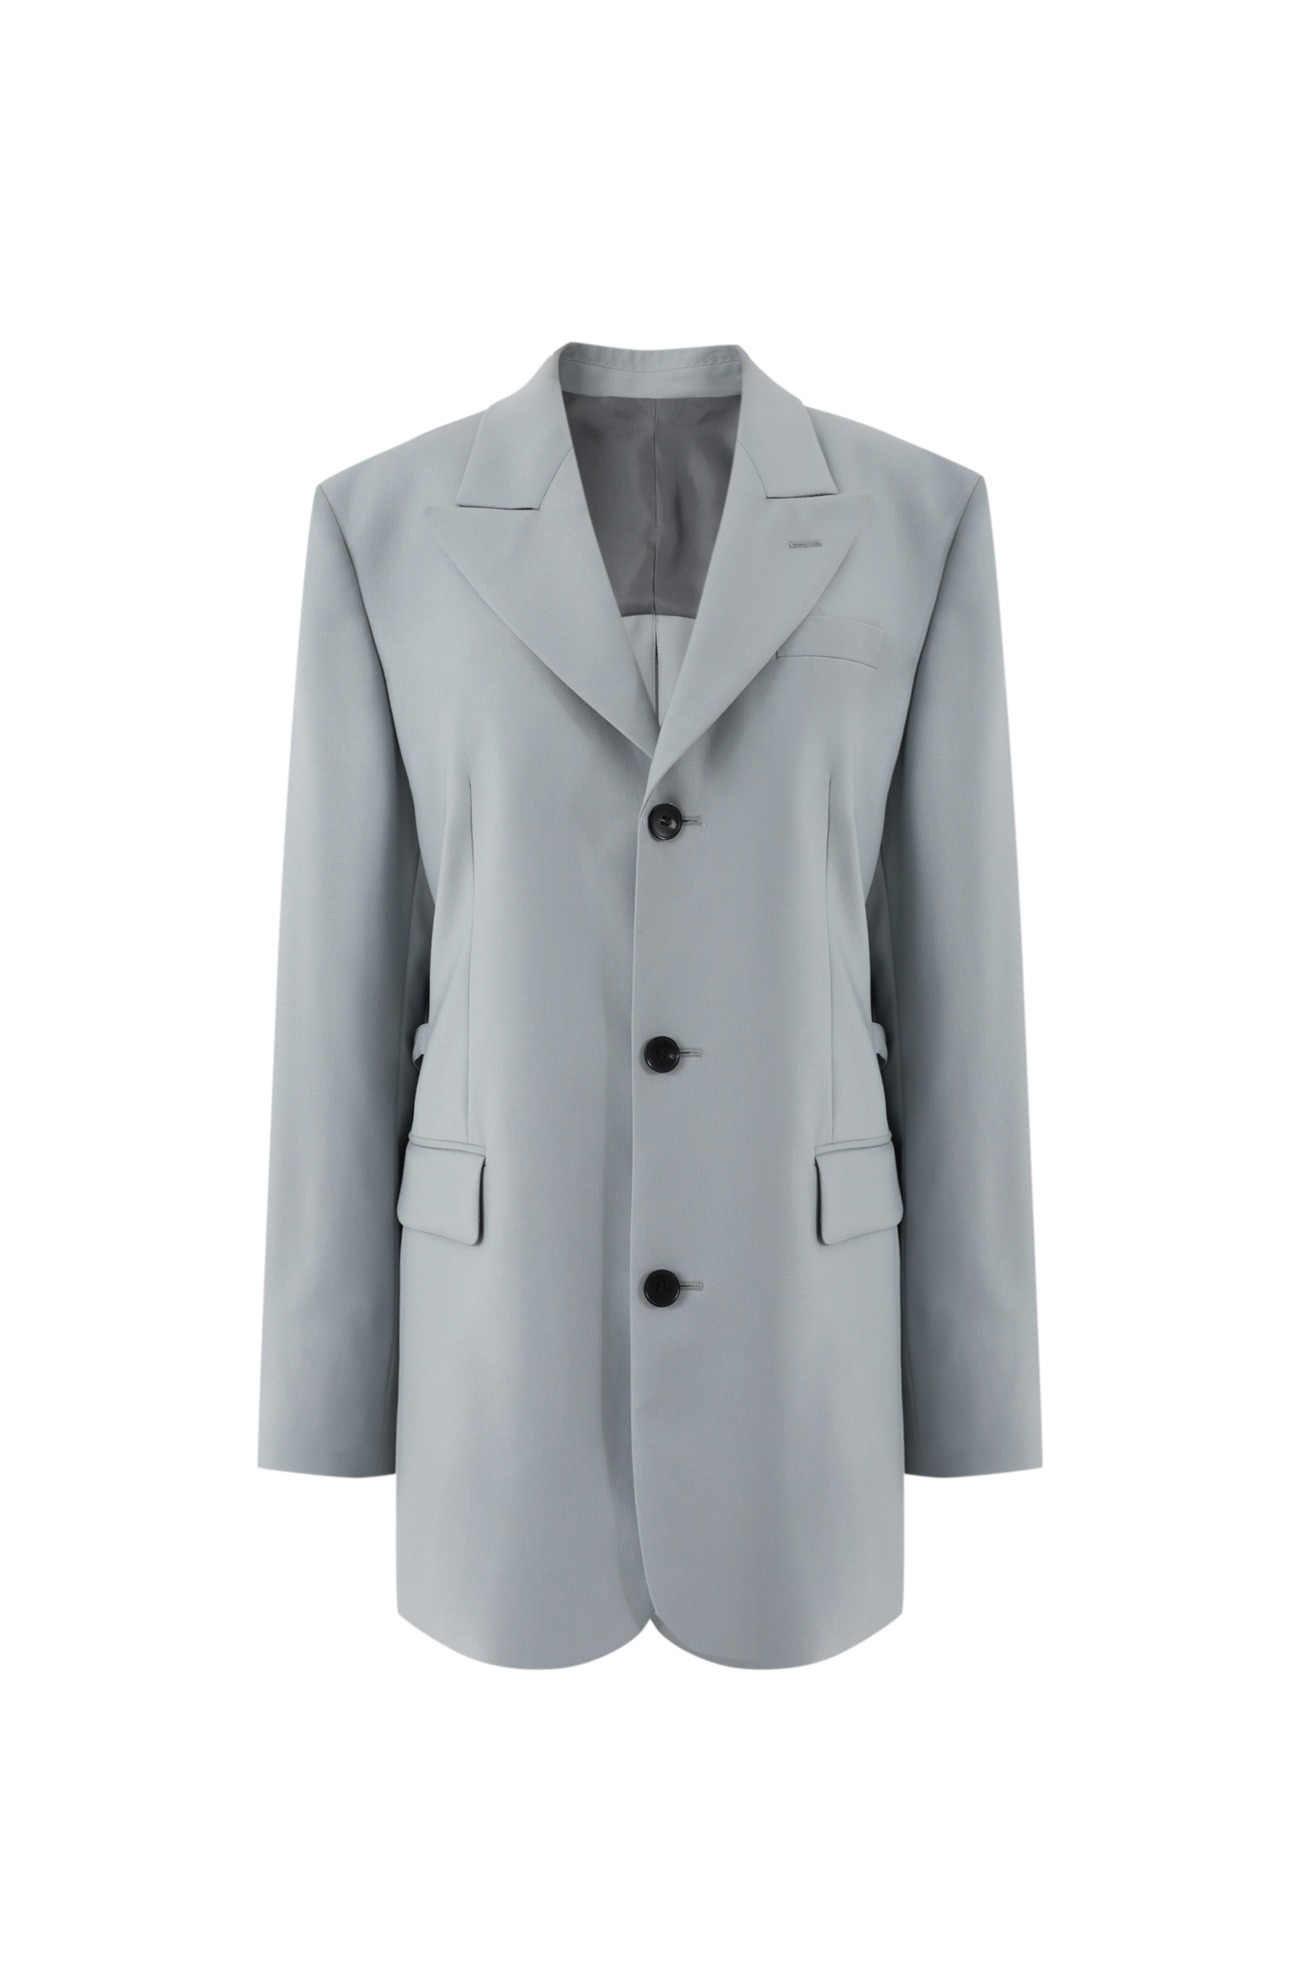 Three Button Blazer with Straps at Slitted Back (LIGHT BLUE)